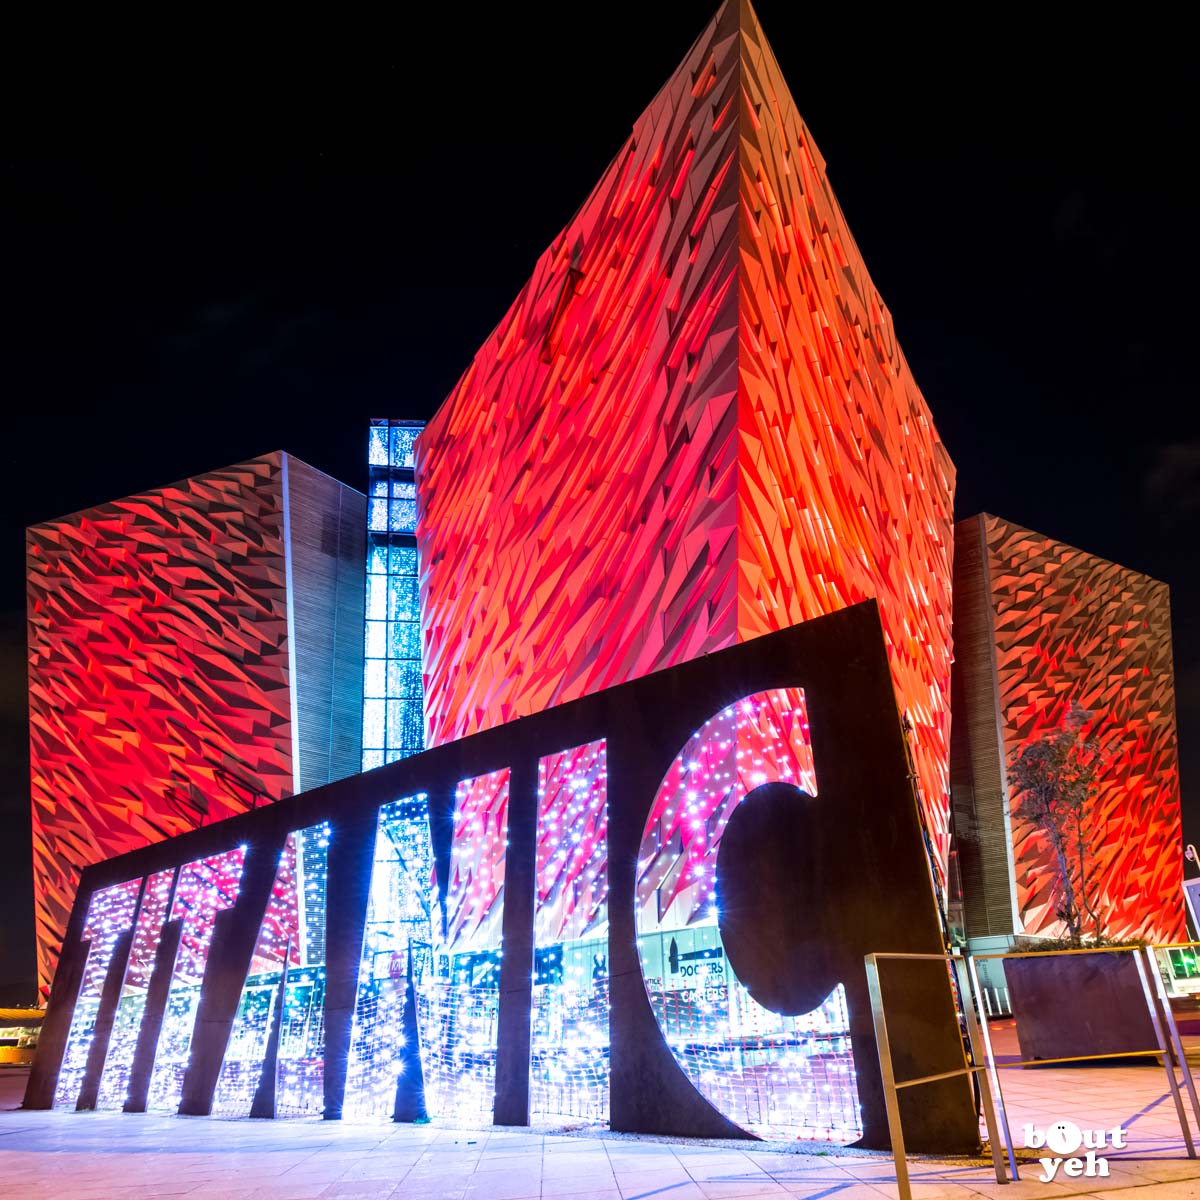 Photograph of Titanic Belfast at night by Bout Yeh photographers Belfast, Northern Ireland - photo 2742